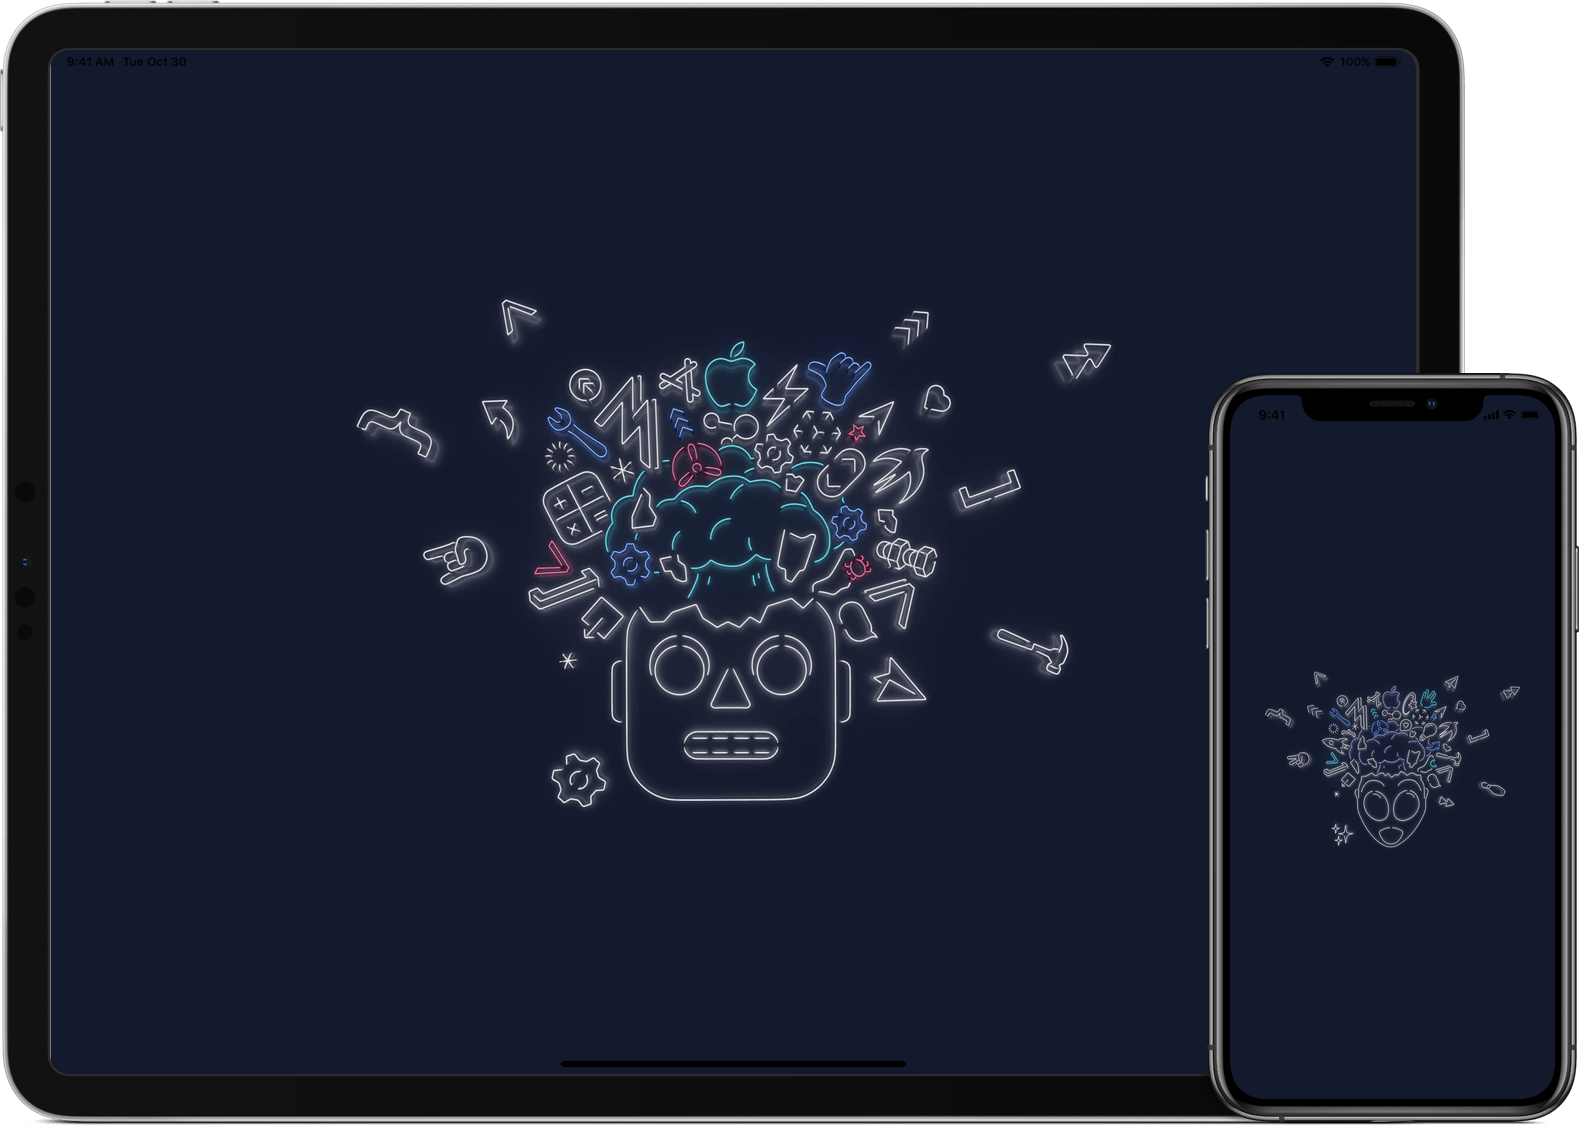 And they have already made wallpapers for iPhones, iPads and Macs inspired by the art of WWDC19!